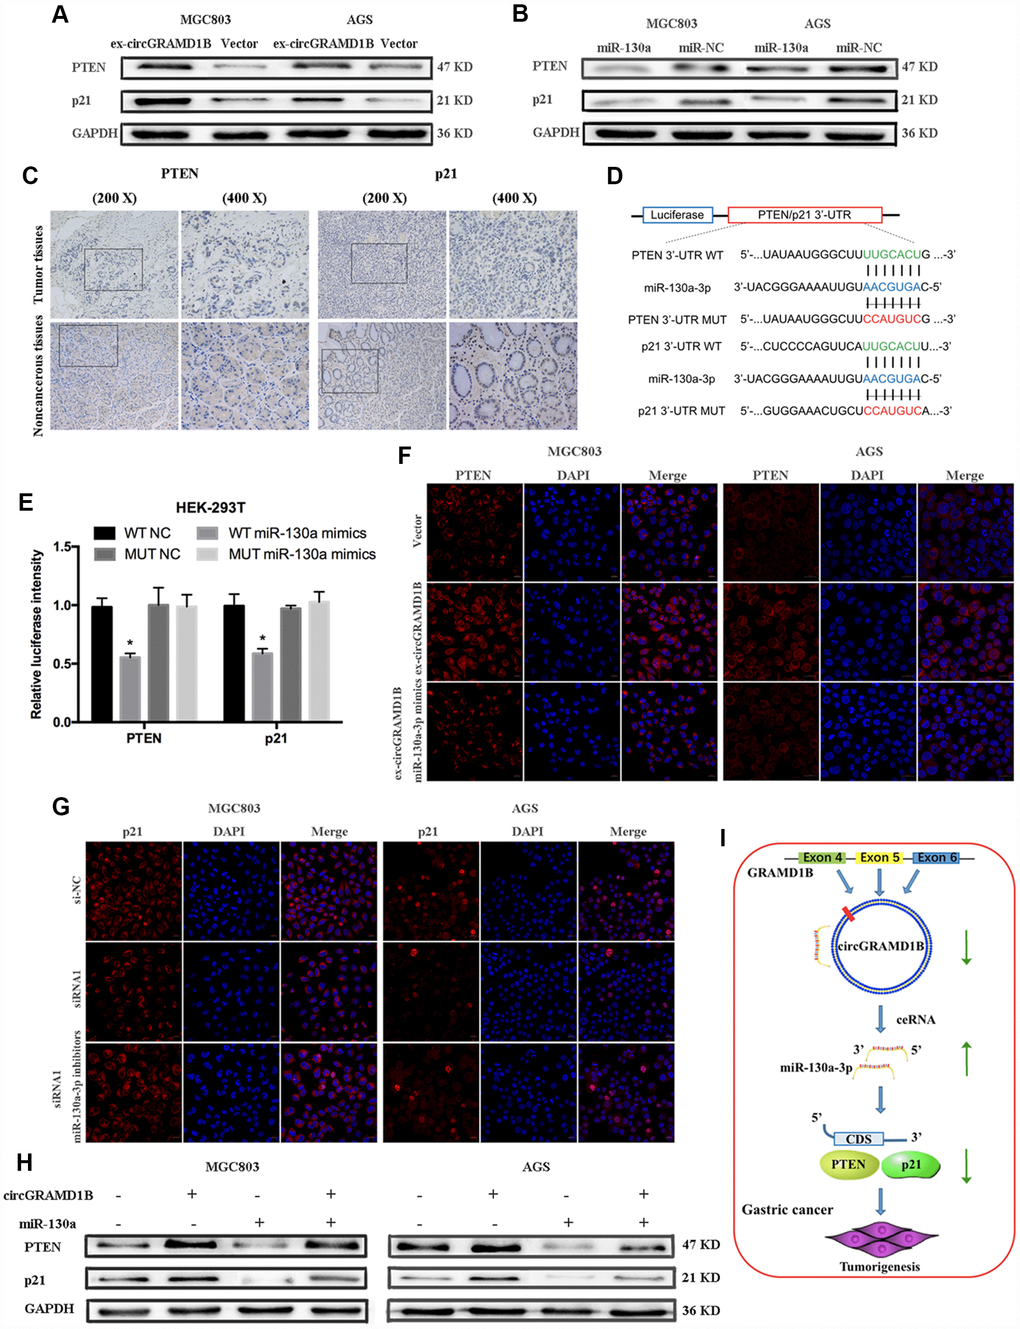 circGRAMD1B inhibits the proliferation and invasion of GC cells by modulating miR-130a-3p/PTEN/p21 axis. (A) Western blot assays showed that circGRAMD1B upregulated the protein expression levels of PTEN and p21 in transfected MGC803 and AGS cells. (B) Western blot assays showed that miR-130a-3p decreased the protein expression levels of PTEN and p21 in transfected MGC803 and AGS cells. (C) PTEN and p21 expression was detected via IHC in GC tissues and paired noncancerous tissues. (D) Schematic illustration of PTEN/p21 -3′ UTR-WT and -3′ UTR-MUT luciferase reporter vectors. (E) Luciferase reporter assays demonstrated that PTEN and p21 are direct targets of miR-130a-3p mimics. (F–G) Relative protein expression level of PTEN and p21 were assessed by IF after GC cells transfected with circGRAMD1B-overexpressing plasmid or the silencing siRNA1, and miR-130a-3p mimics or inhibitors. (H) Western blot assays showed that miR-130a-3p could partly decrease the protein expression levels of PTEN and p21, which were promoted by circGRAMD1B. (I) Schematic diagram of the regulatory mechanism of circGRAMD1B/ miR-130a-3p/ PTEN/p21 axis in the inhibition of GC progression. (Values are shown as the mean ± standard error of the mean based on three independent experiments. *P 